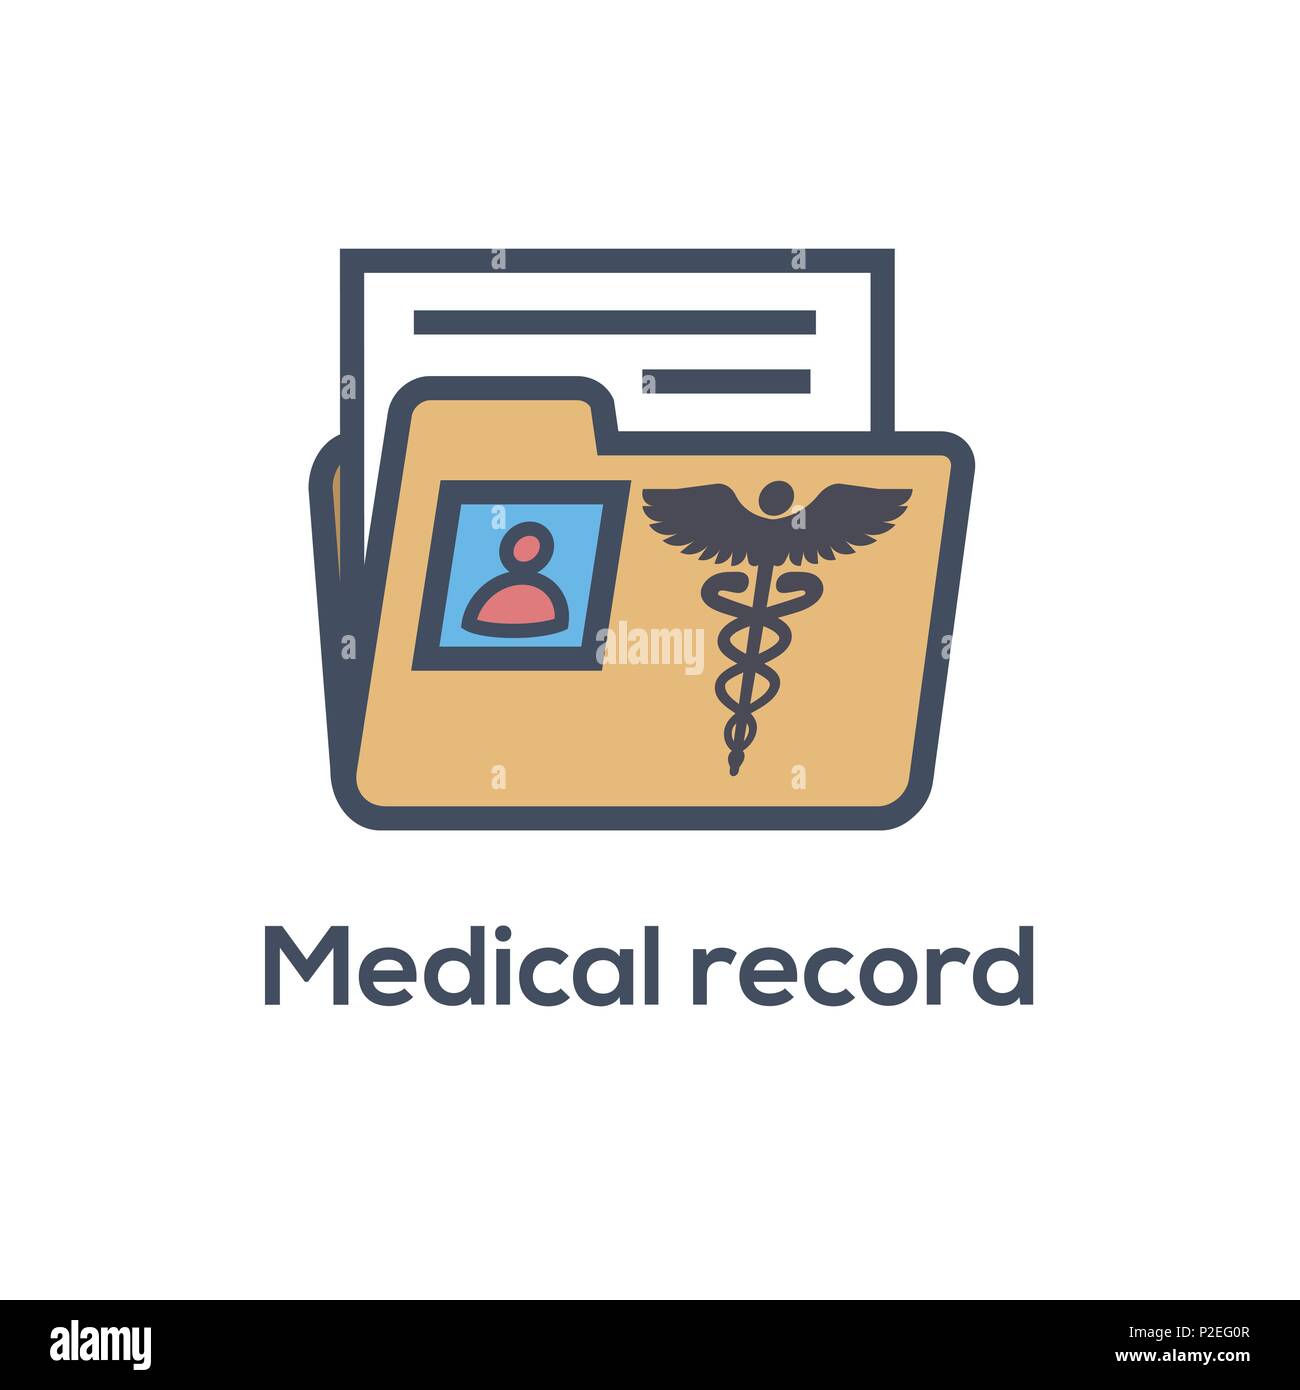 Medical Records Icon - Caduceus and personal health record imagery - phr, emr, ehr Stock Vector